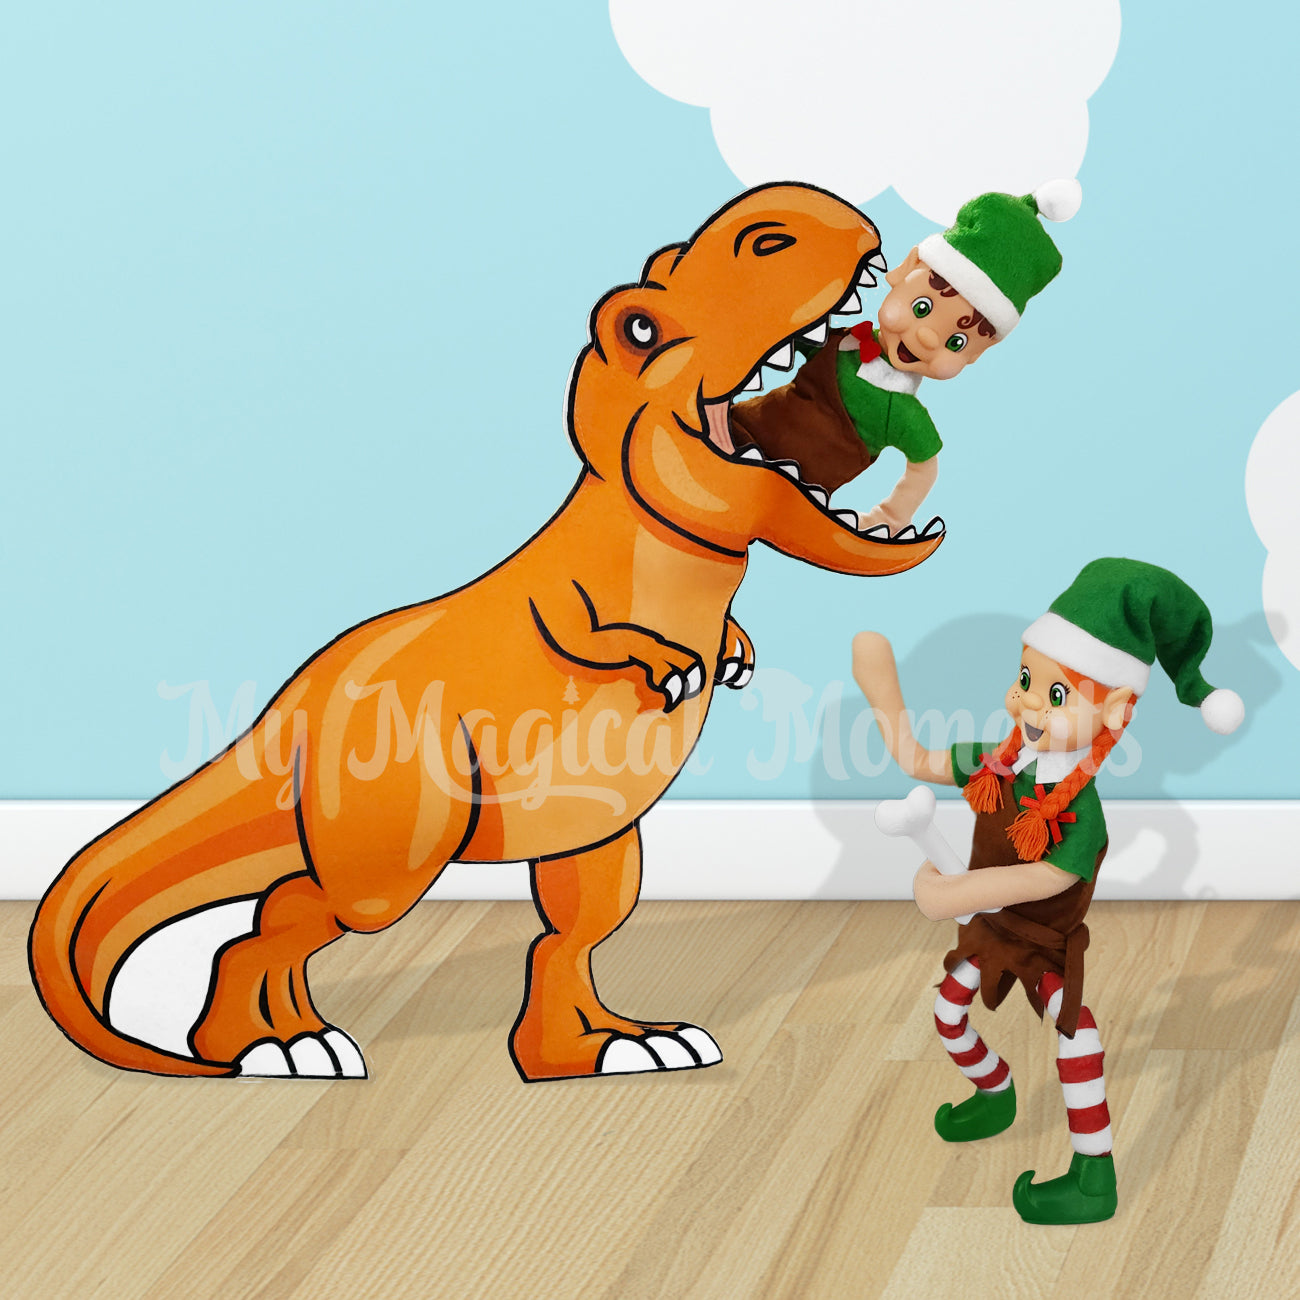 Dinosaur costume and caveman elf costume worn by my elf friend elves By My Magical Moments